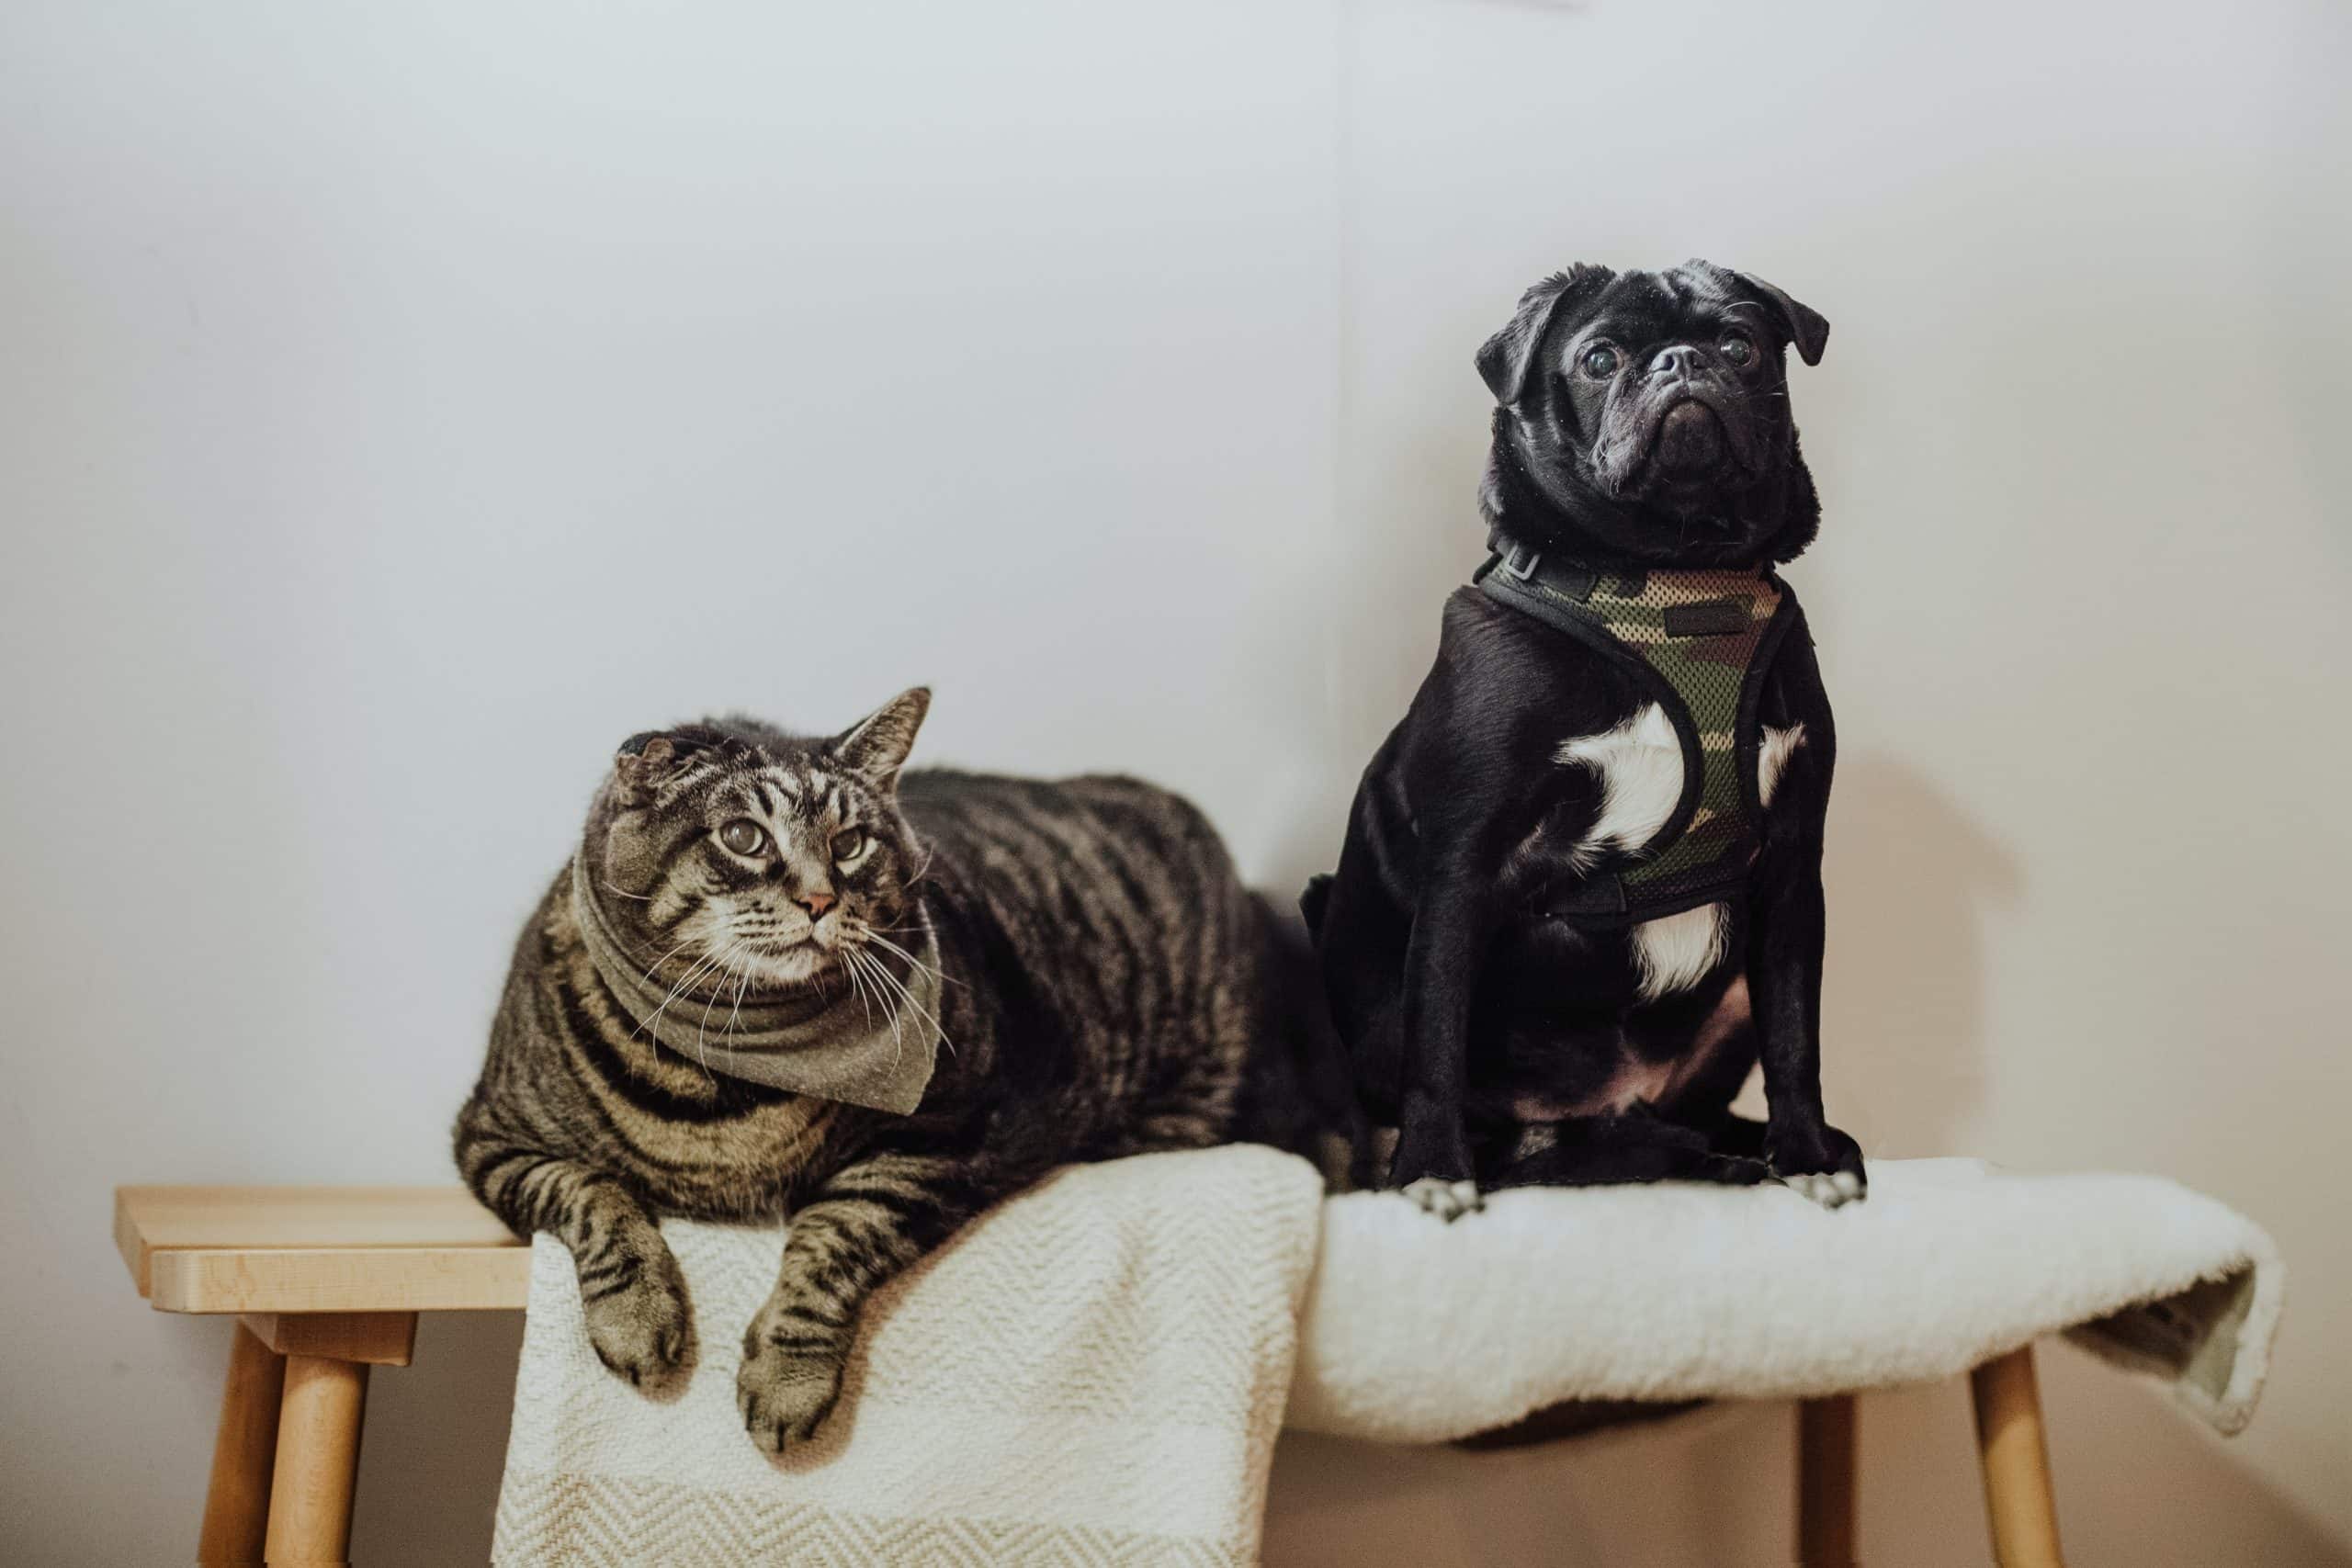 brown and black striped tabby cat sitting on a bench next to a black pug with a white fur chest